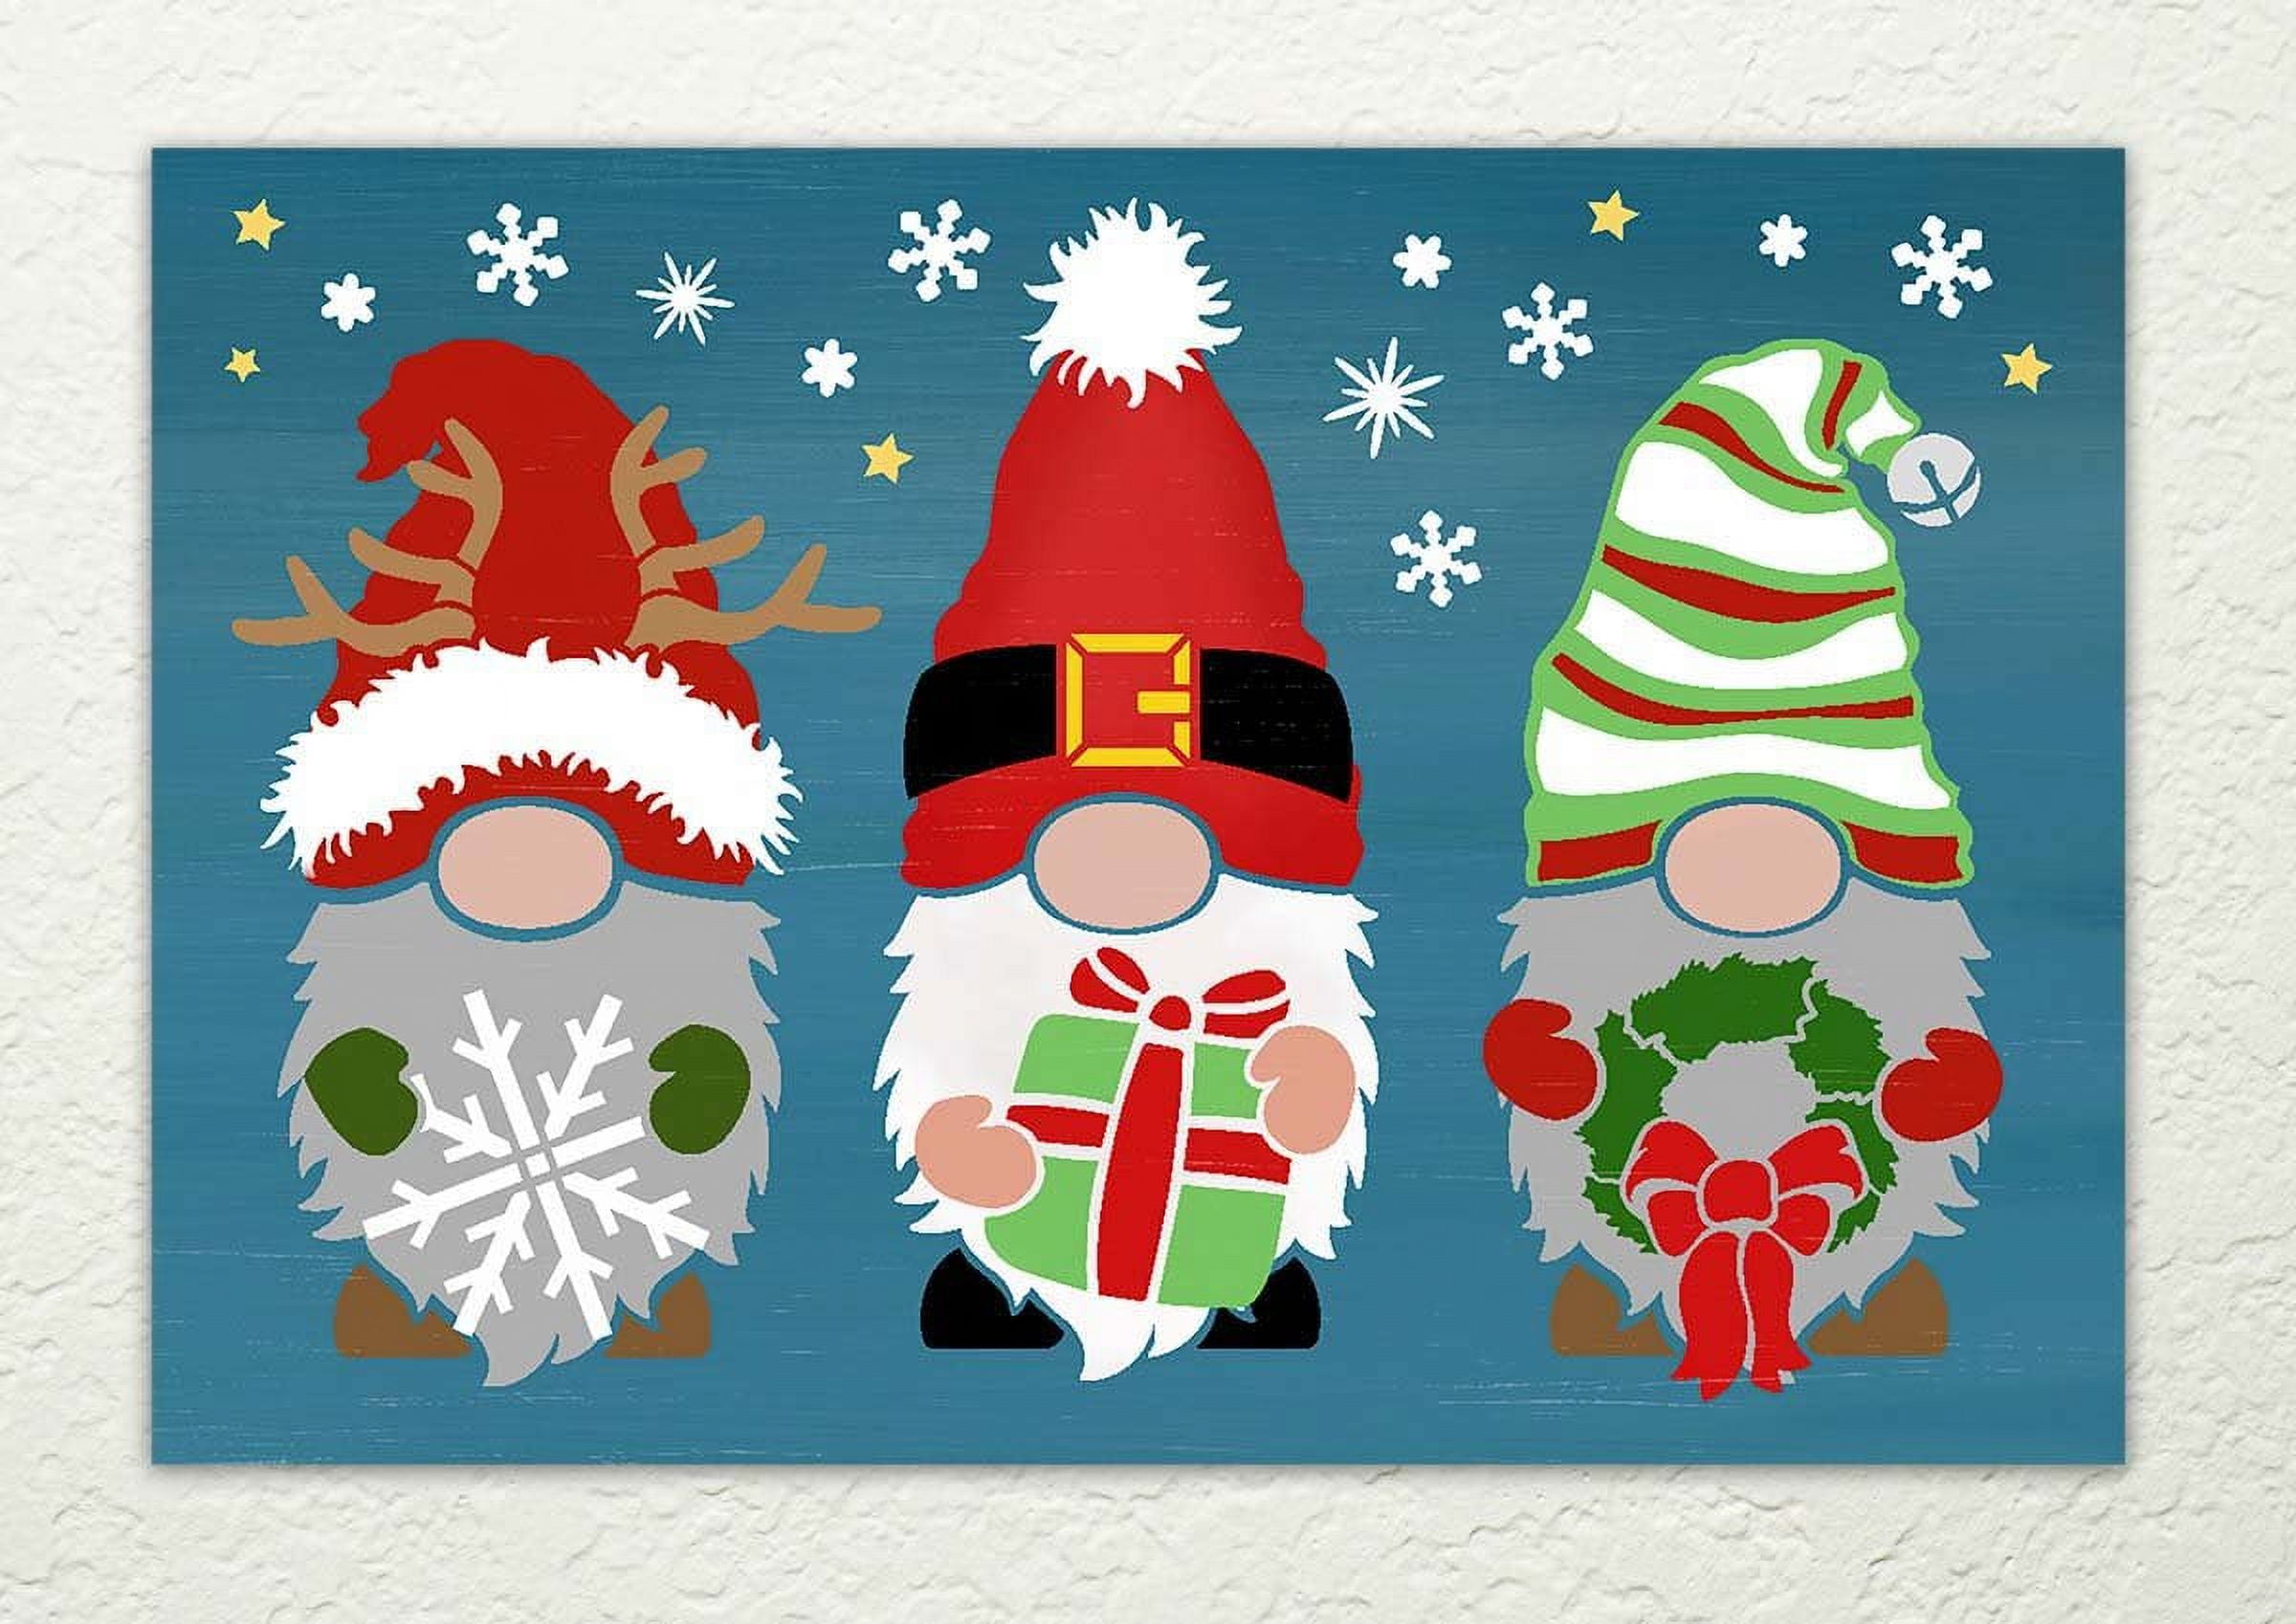 Christmas Vinyl Vinyl Sticker Maker 12 X 12, /Bag DIY Self Adhesive  Decorative Signs For Car, Crafts, And Craft Decorations From Treeshome,  $11.99